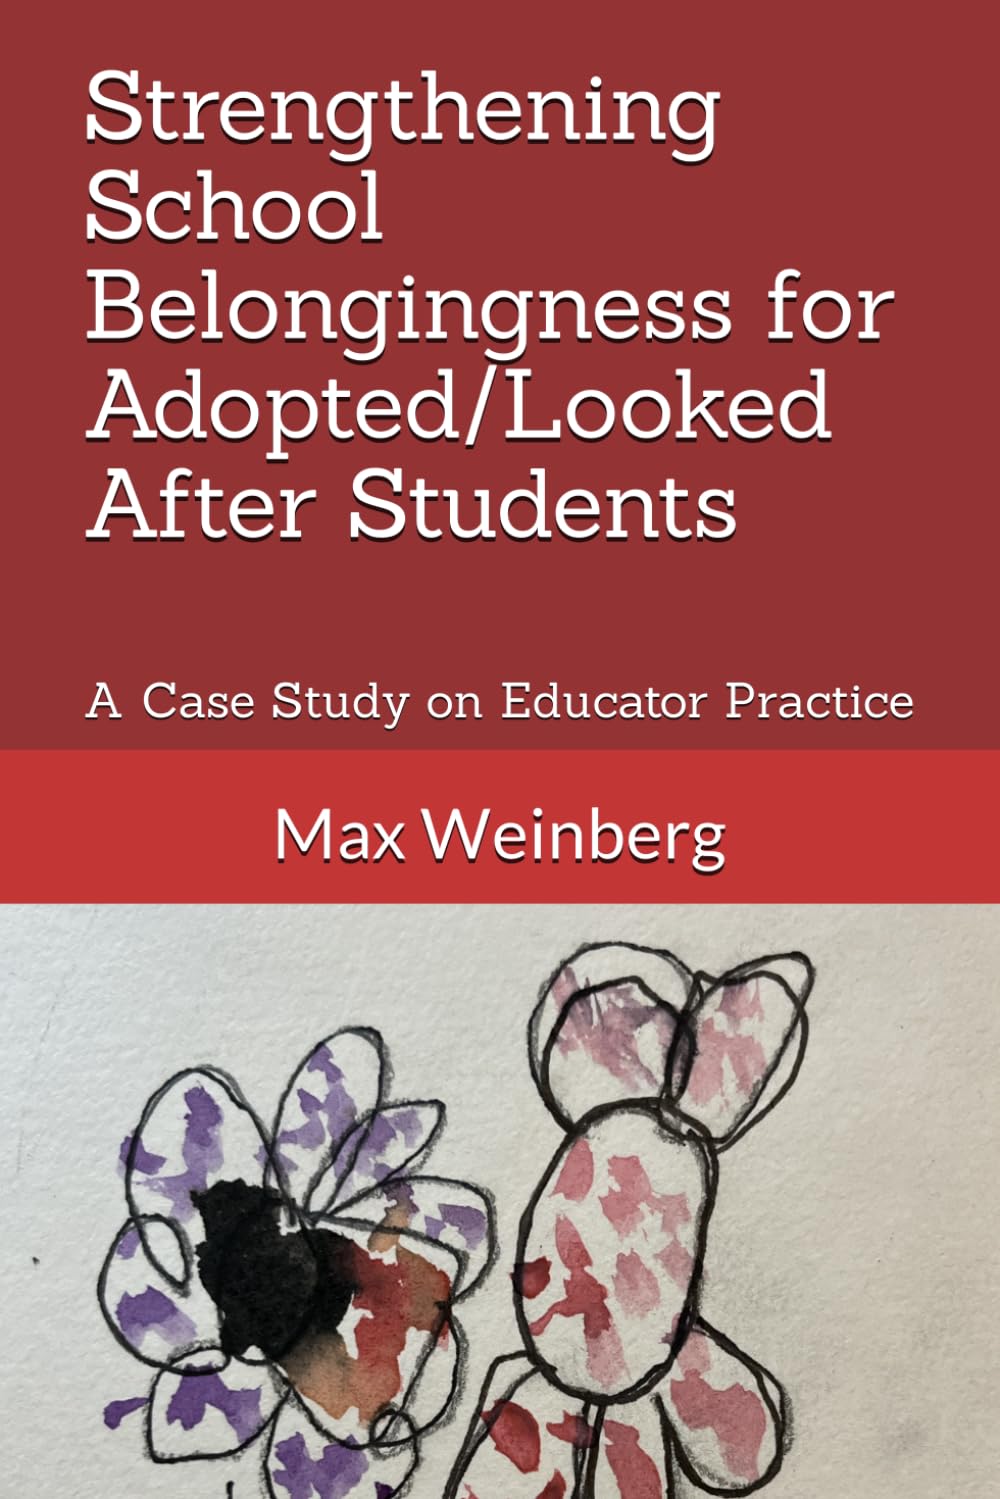 Strengthening School Belongingness for Adopted/Looked After Students: A Case Study on Educator Practice